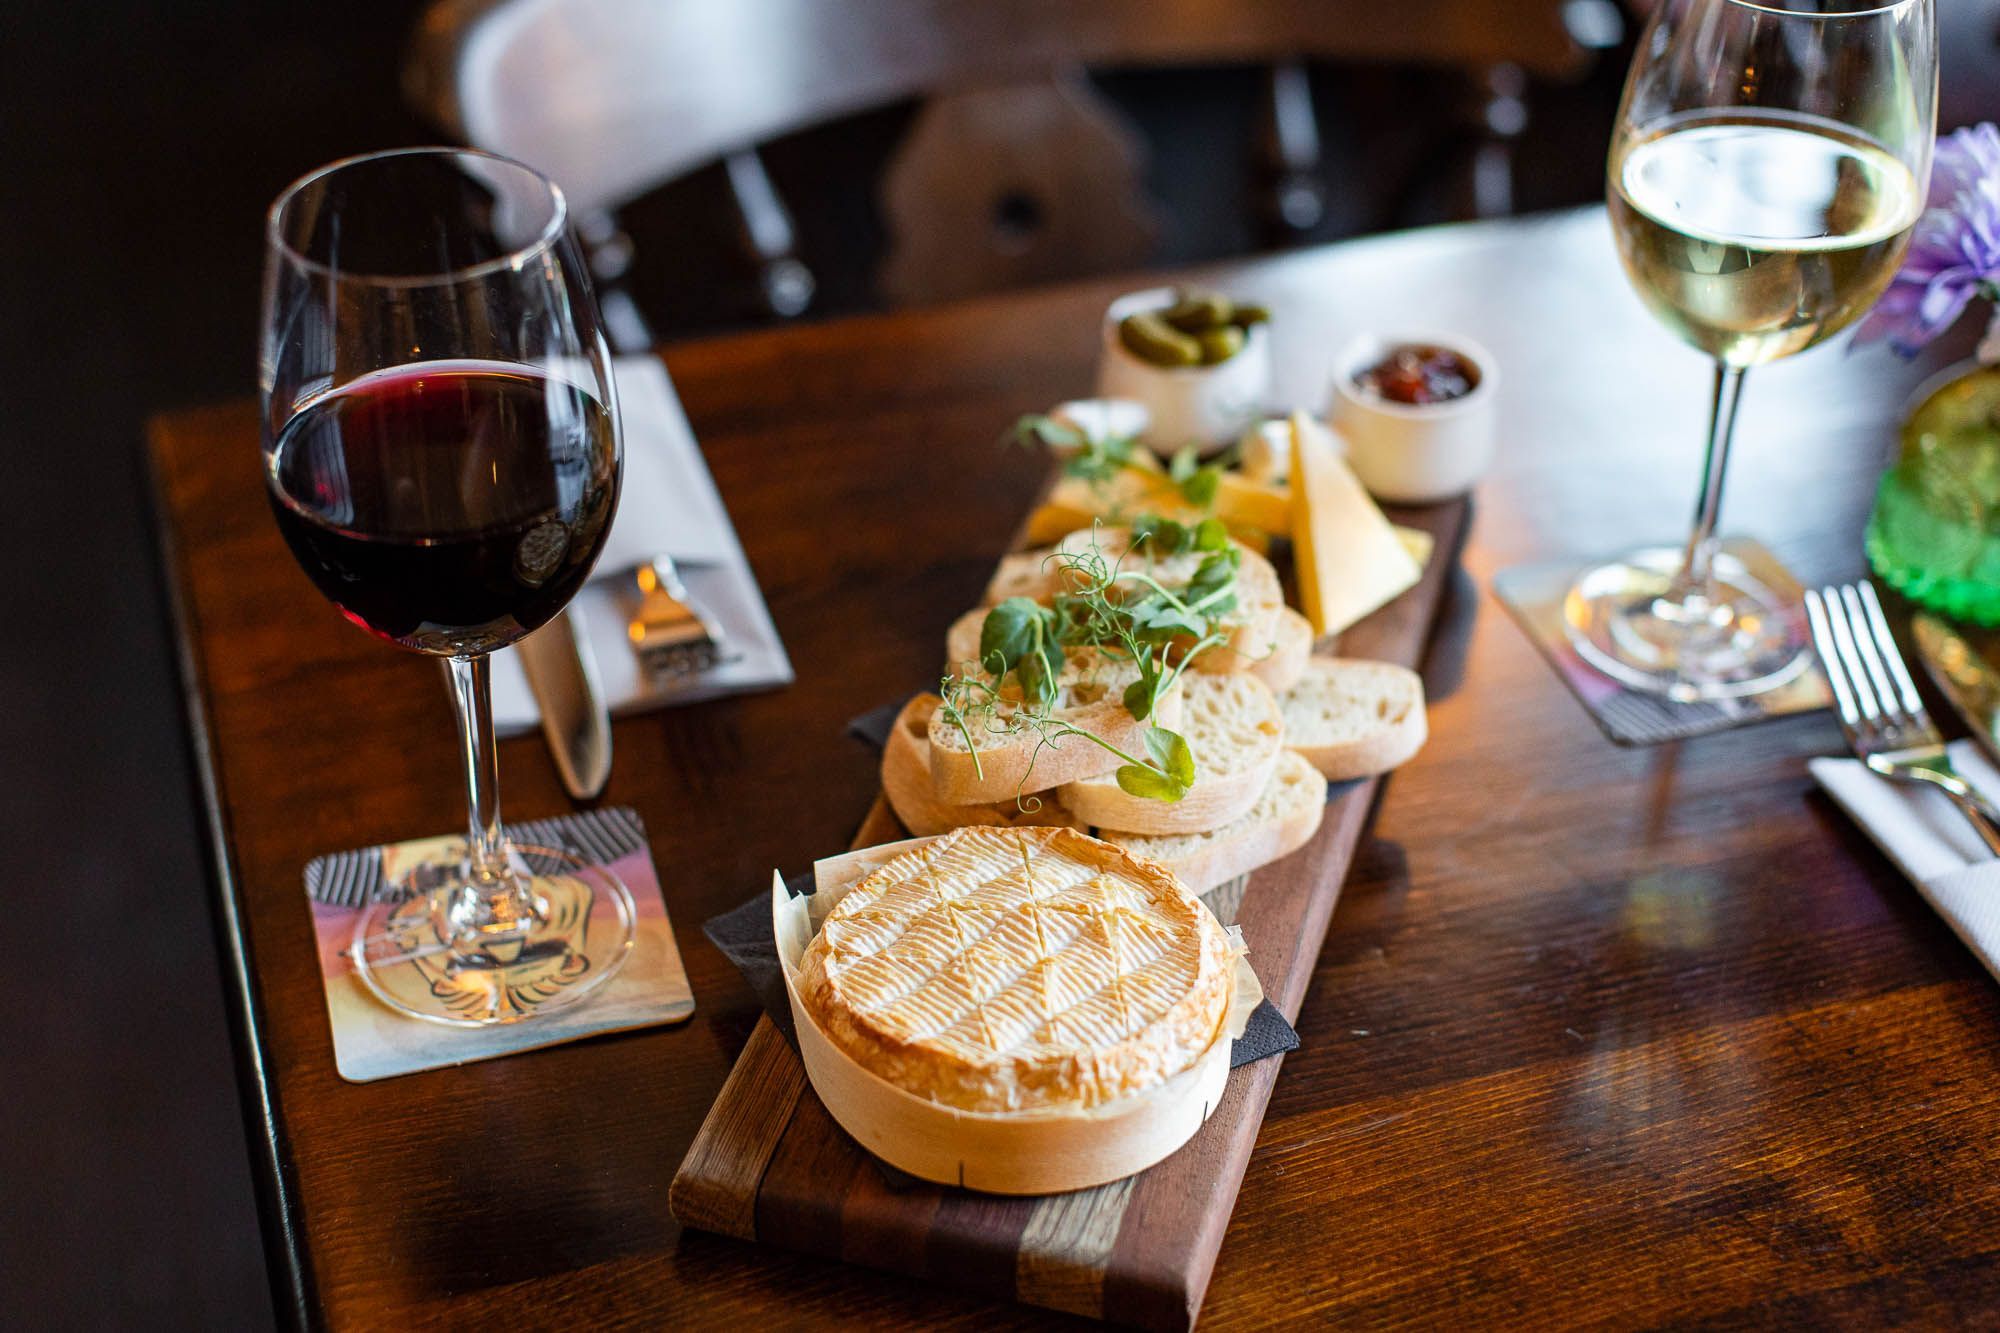 different types of cheese on the board served with glass of red wine